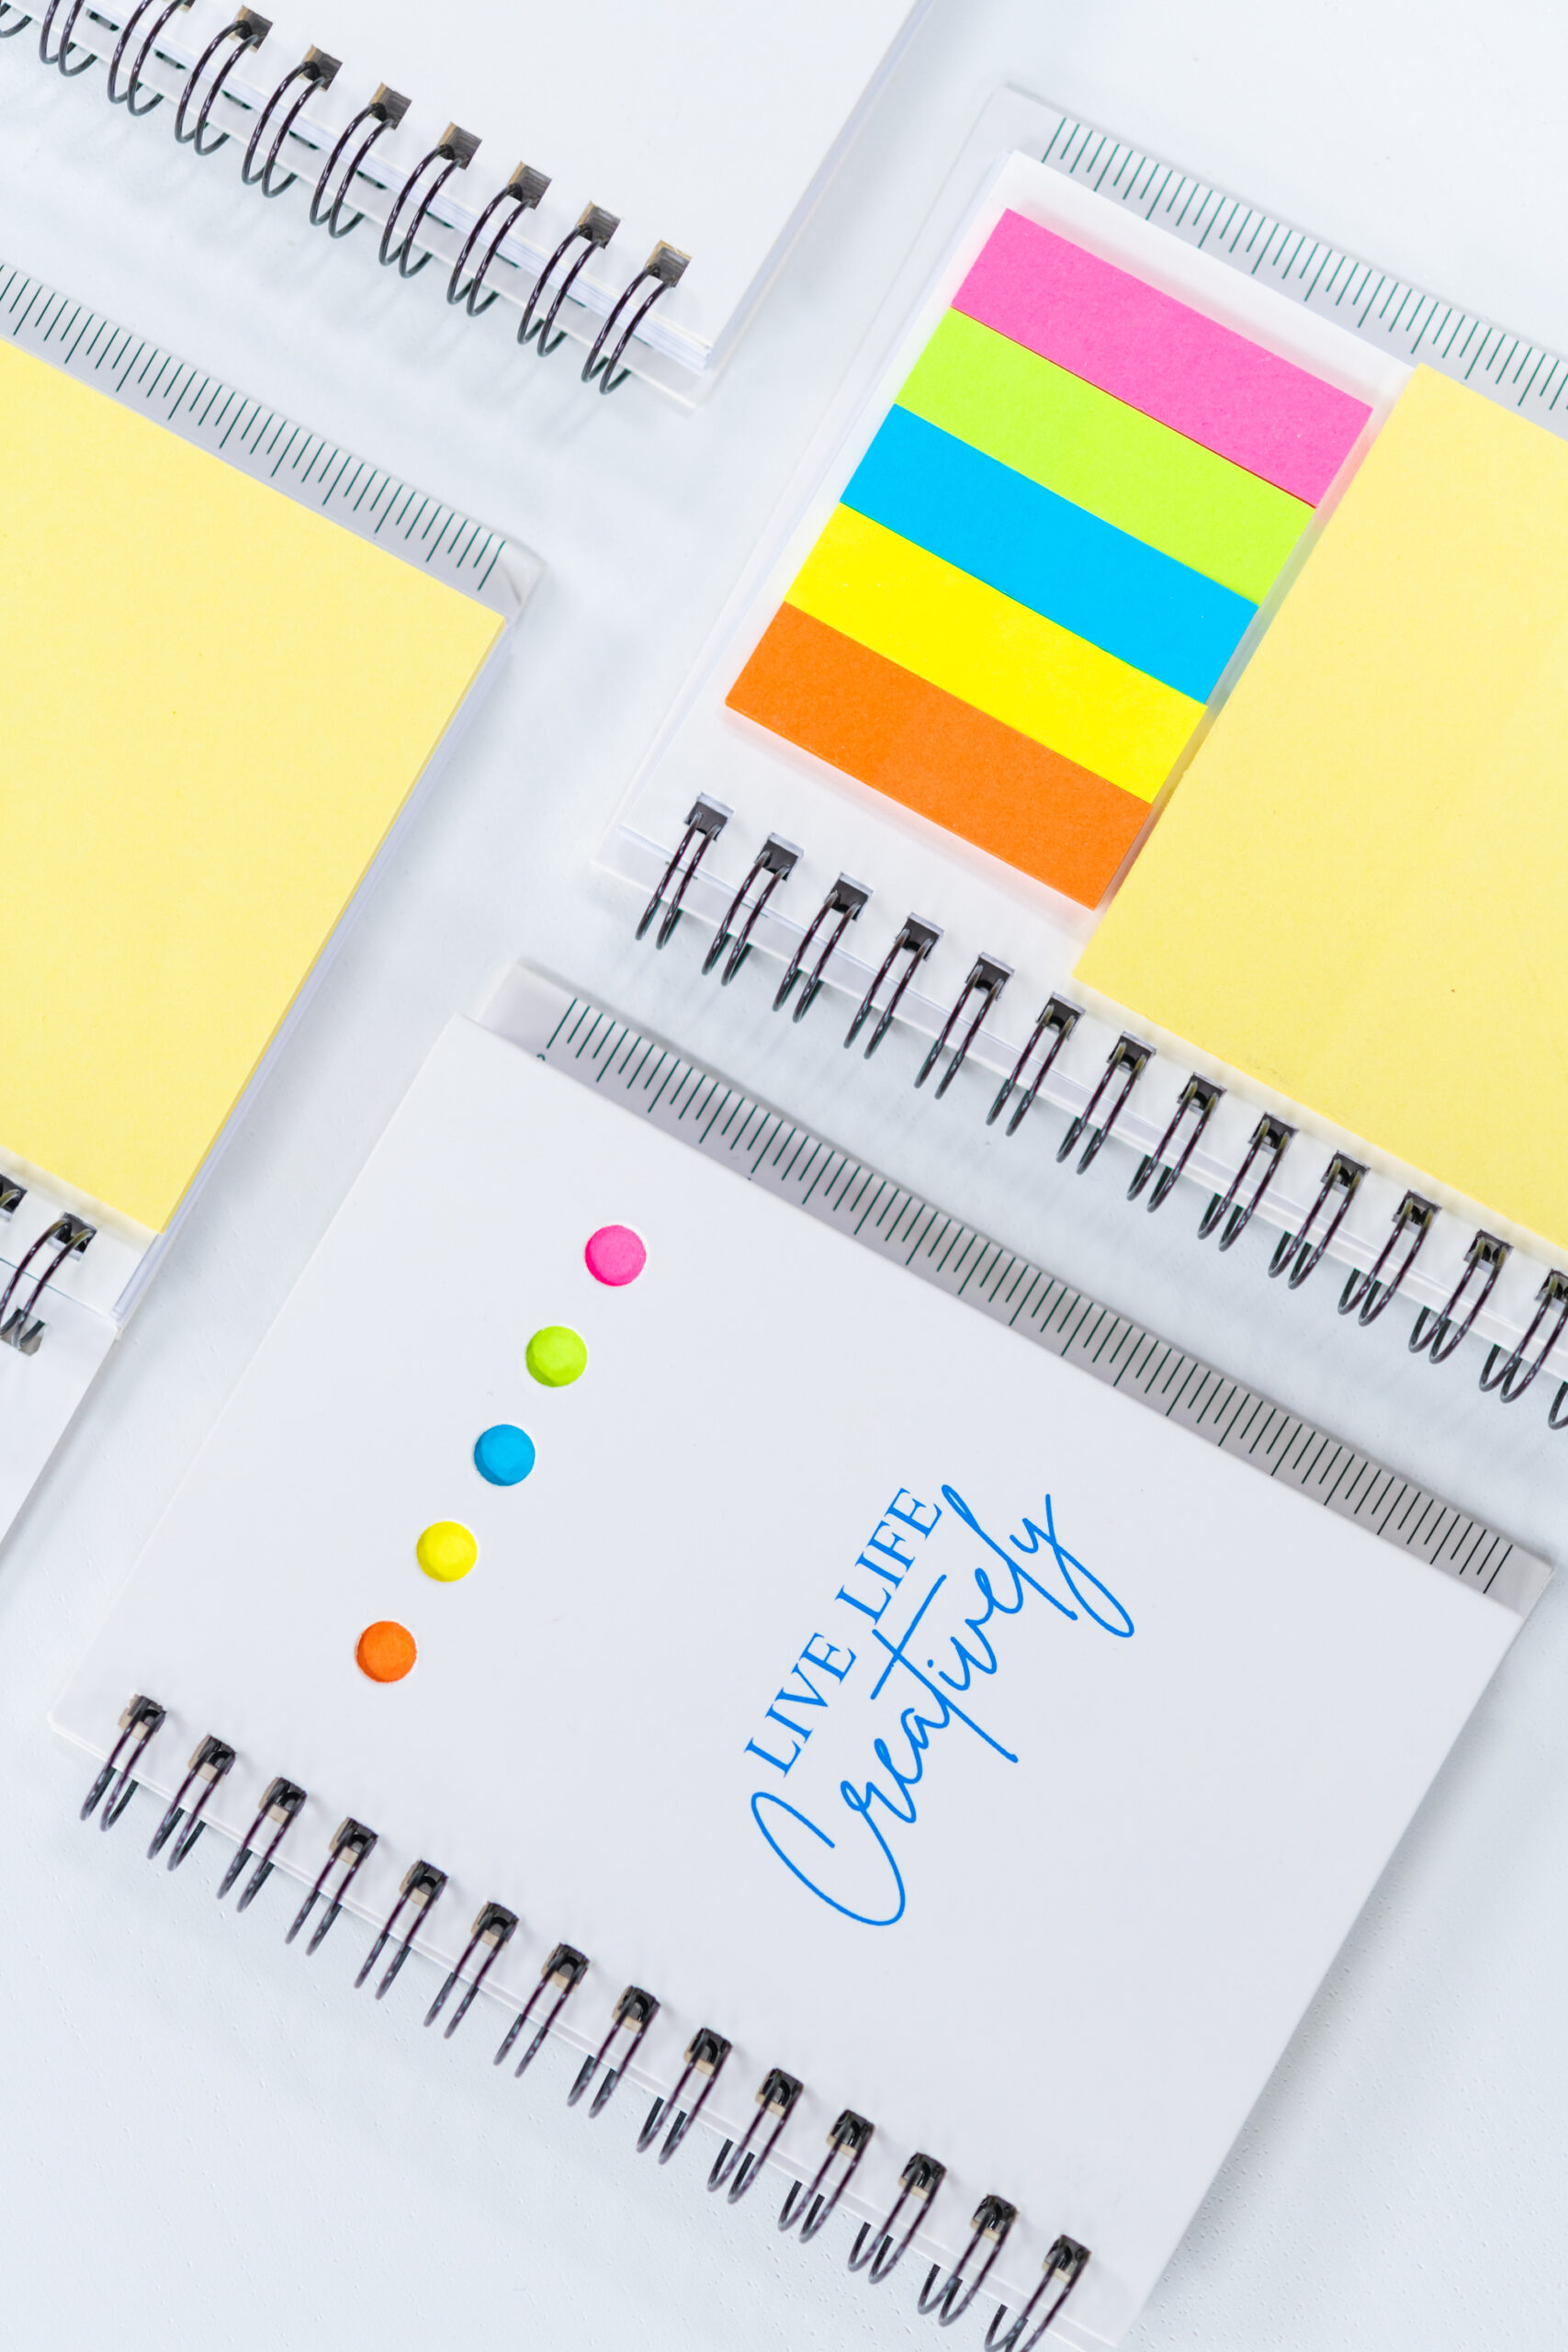 Mini creative inspiration notebook with sticky tabs